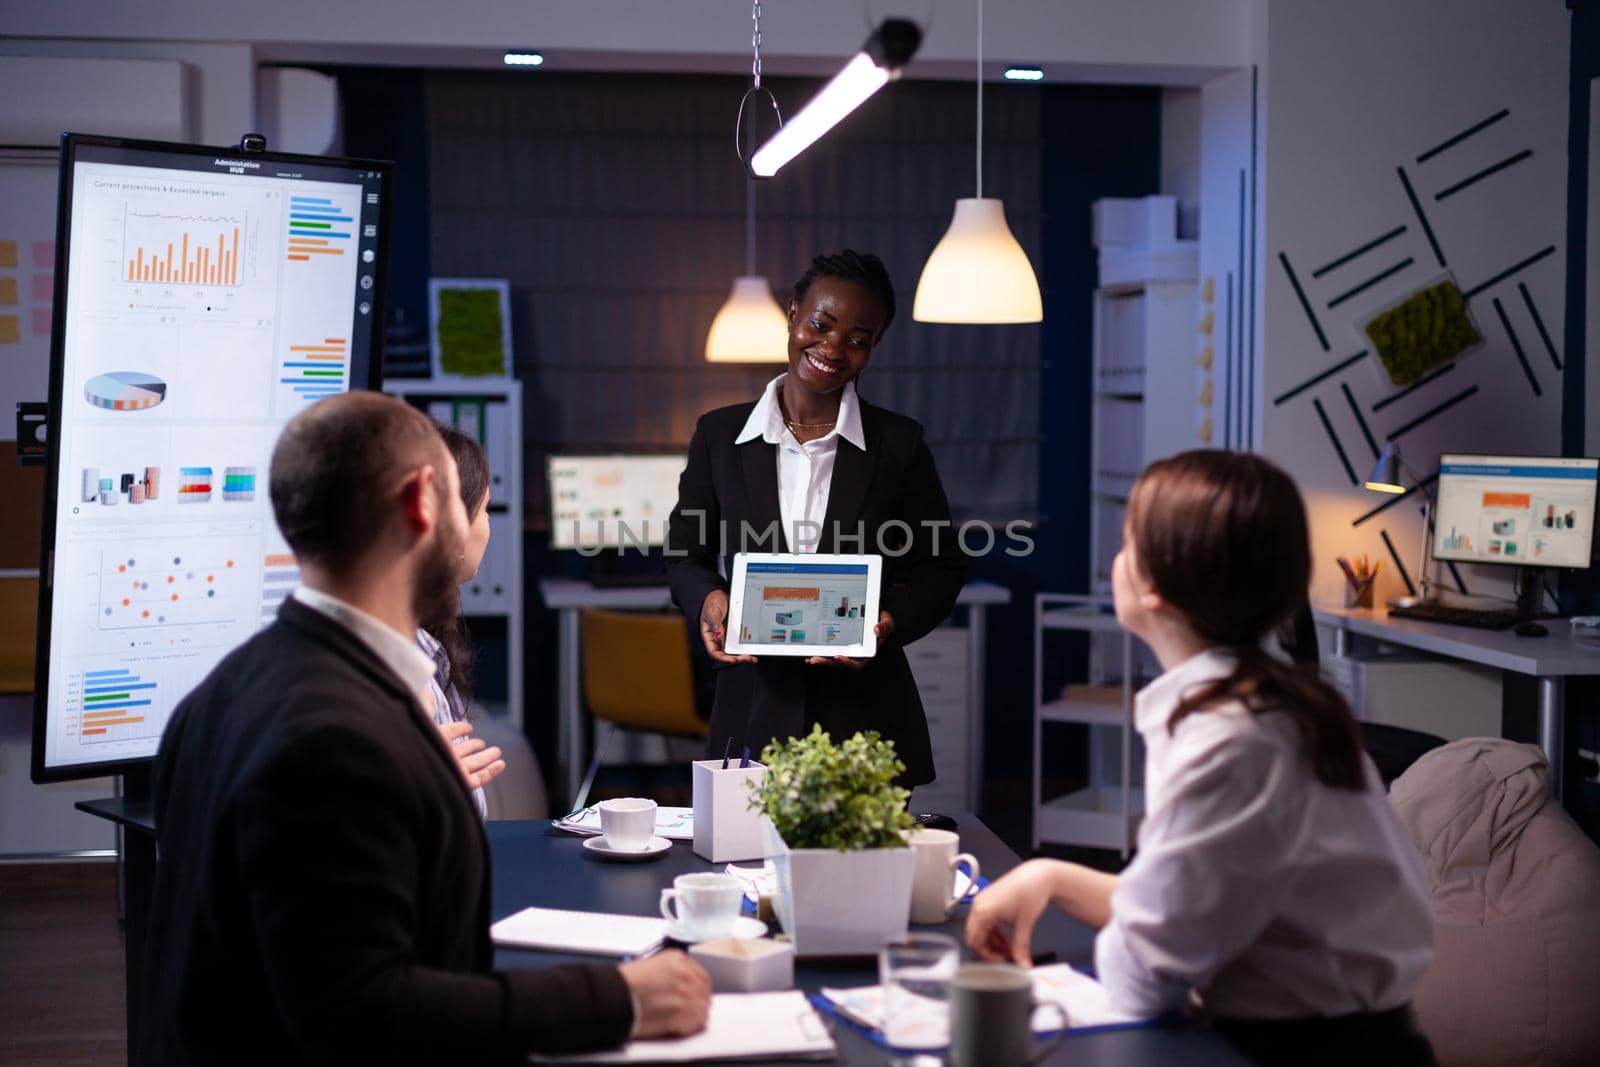 Focused workaholic entrepreneur woman with dark skin explaining management strategy using tablet. Business diverse multi-ethnic teamwork overworking in company office meeting room late at night